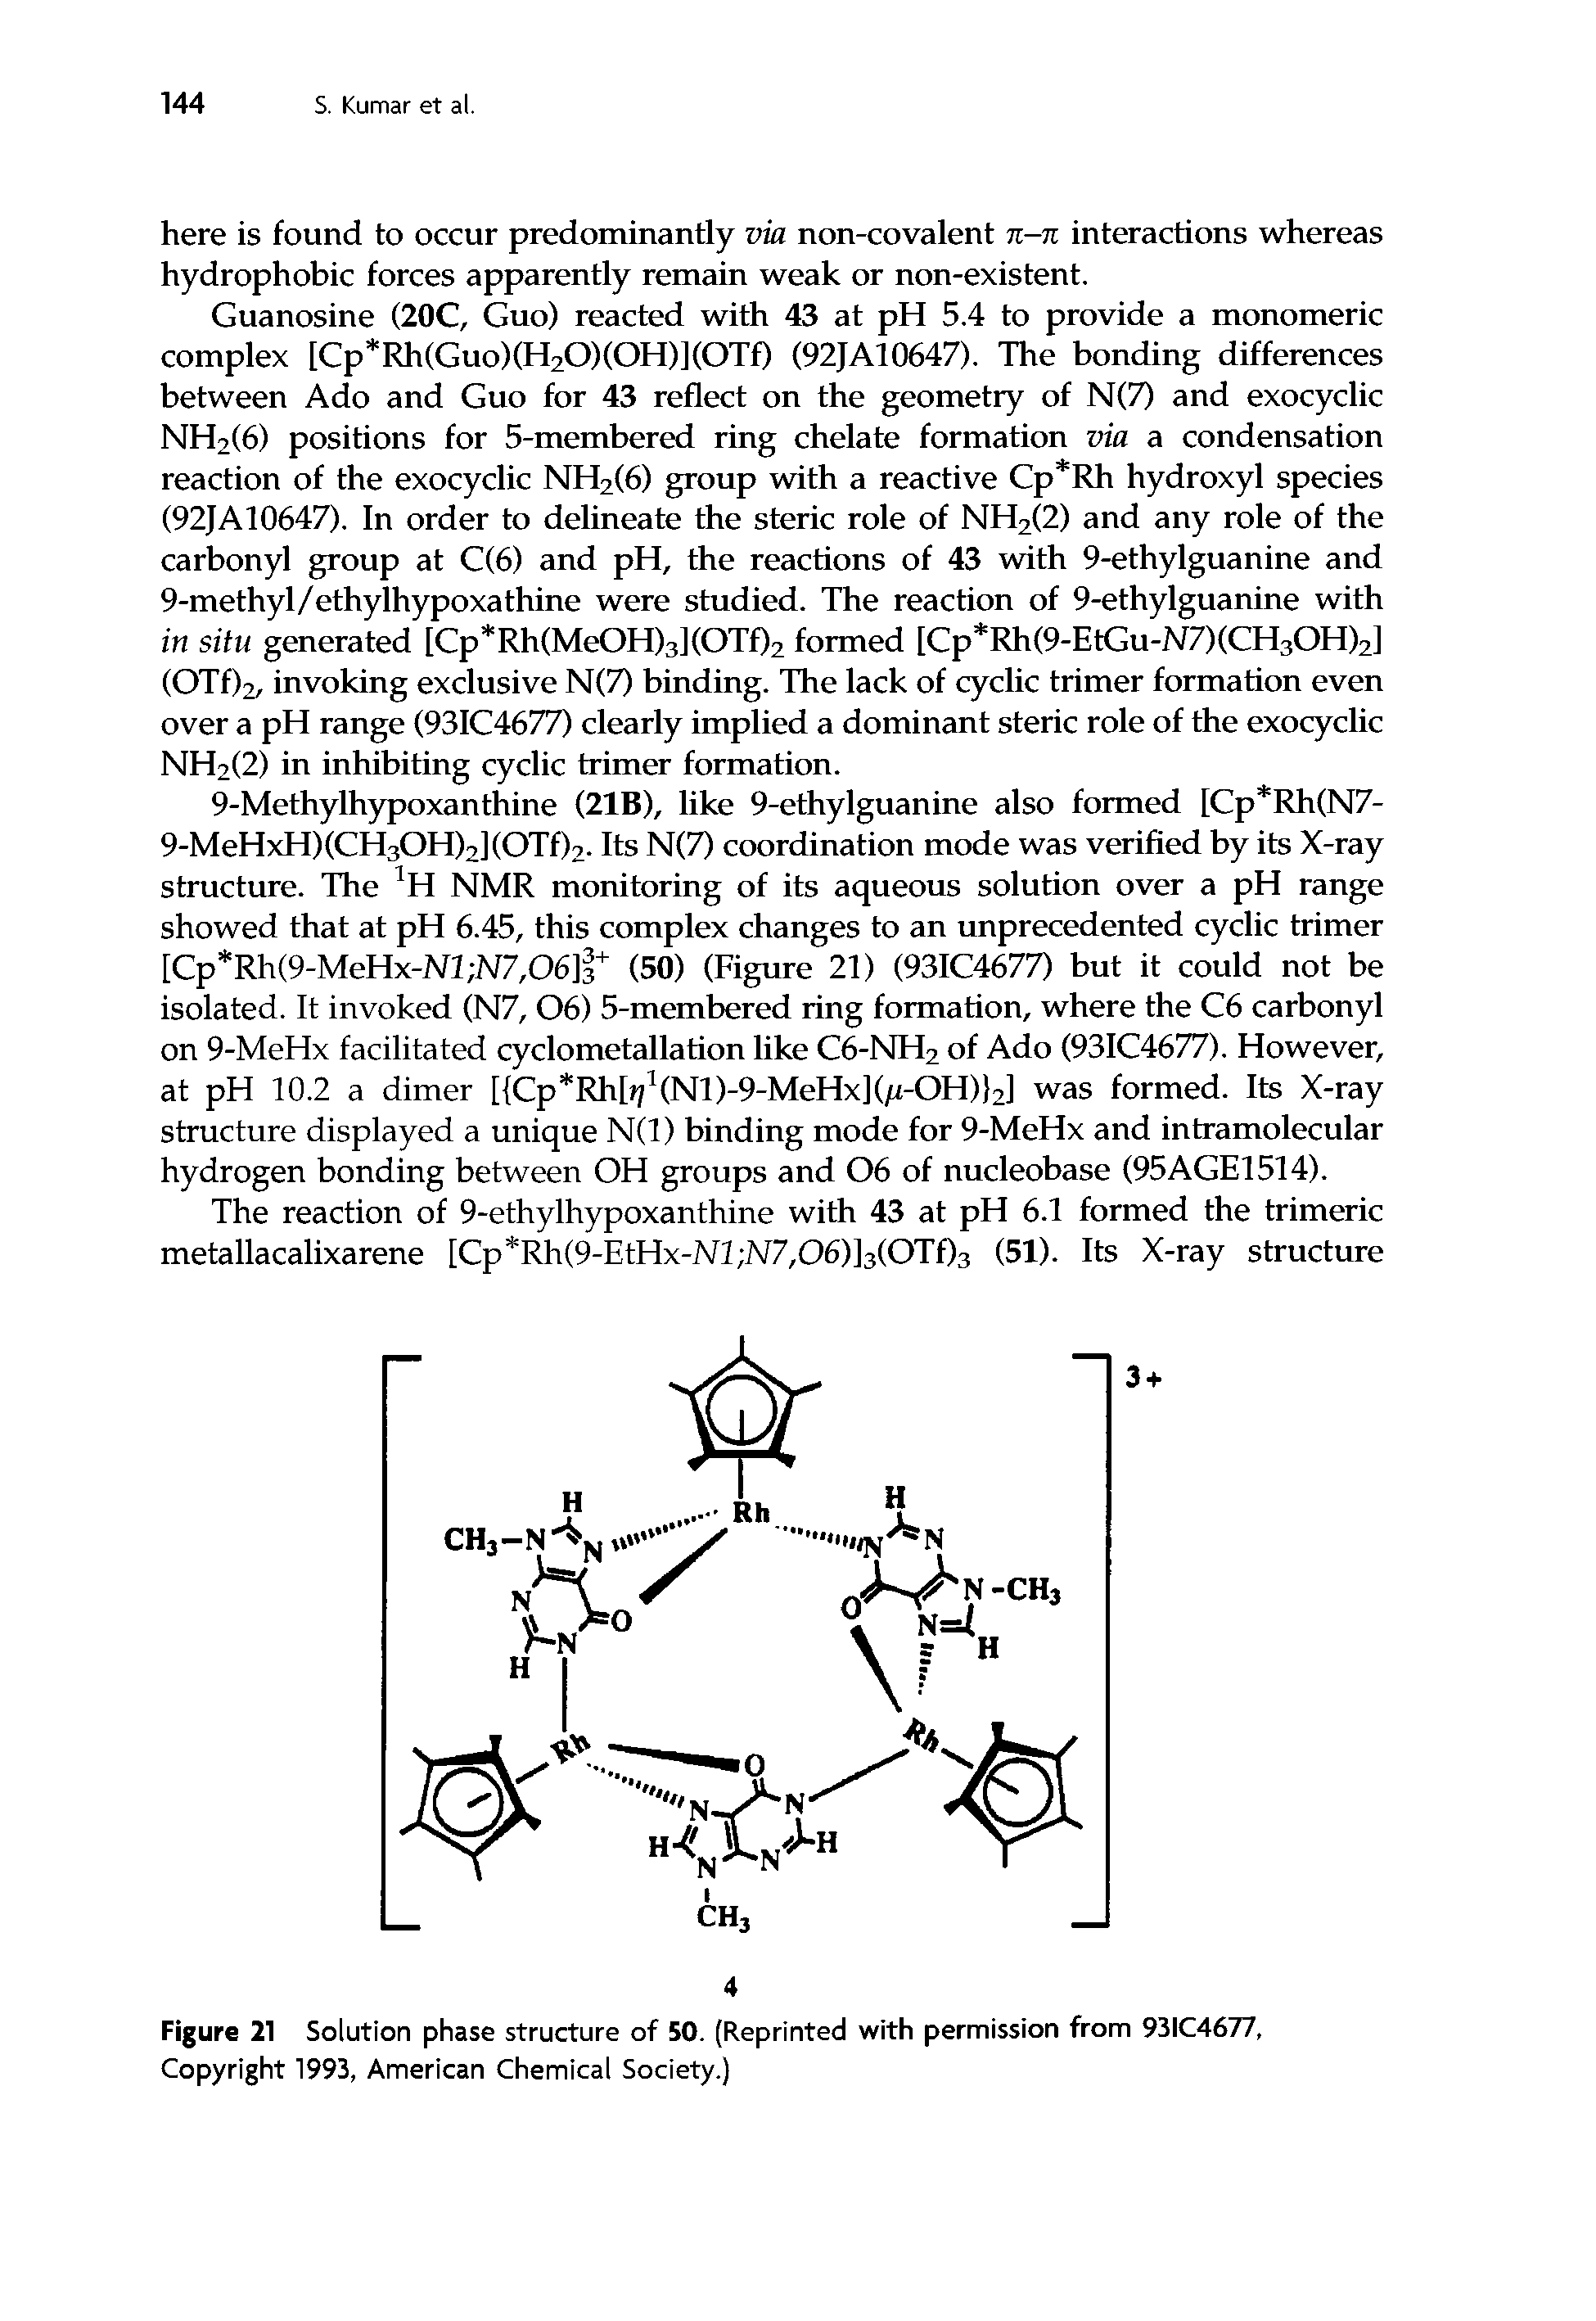 Figure 21 Solution phase structure of 50. (Reprinted with permission from 93IC4677, Copyright 1993, American Chemical Society.)...